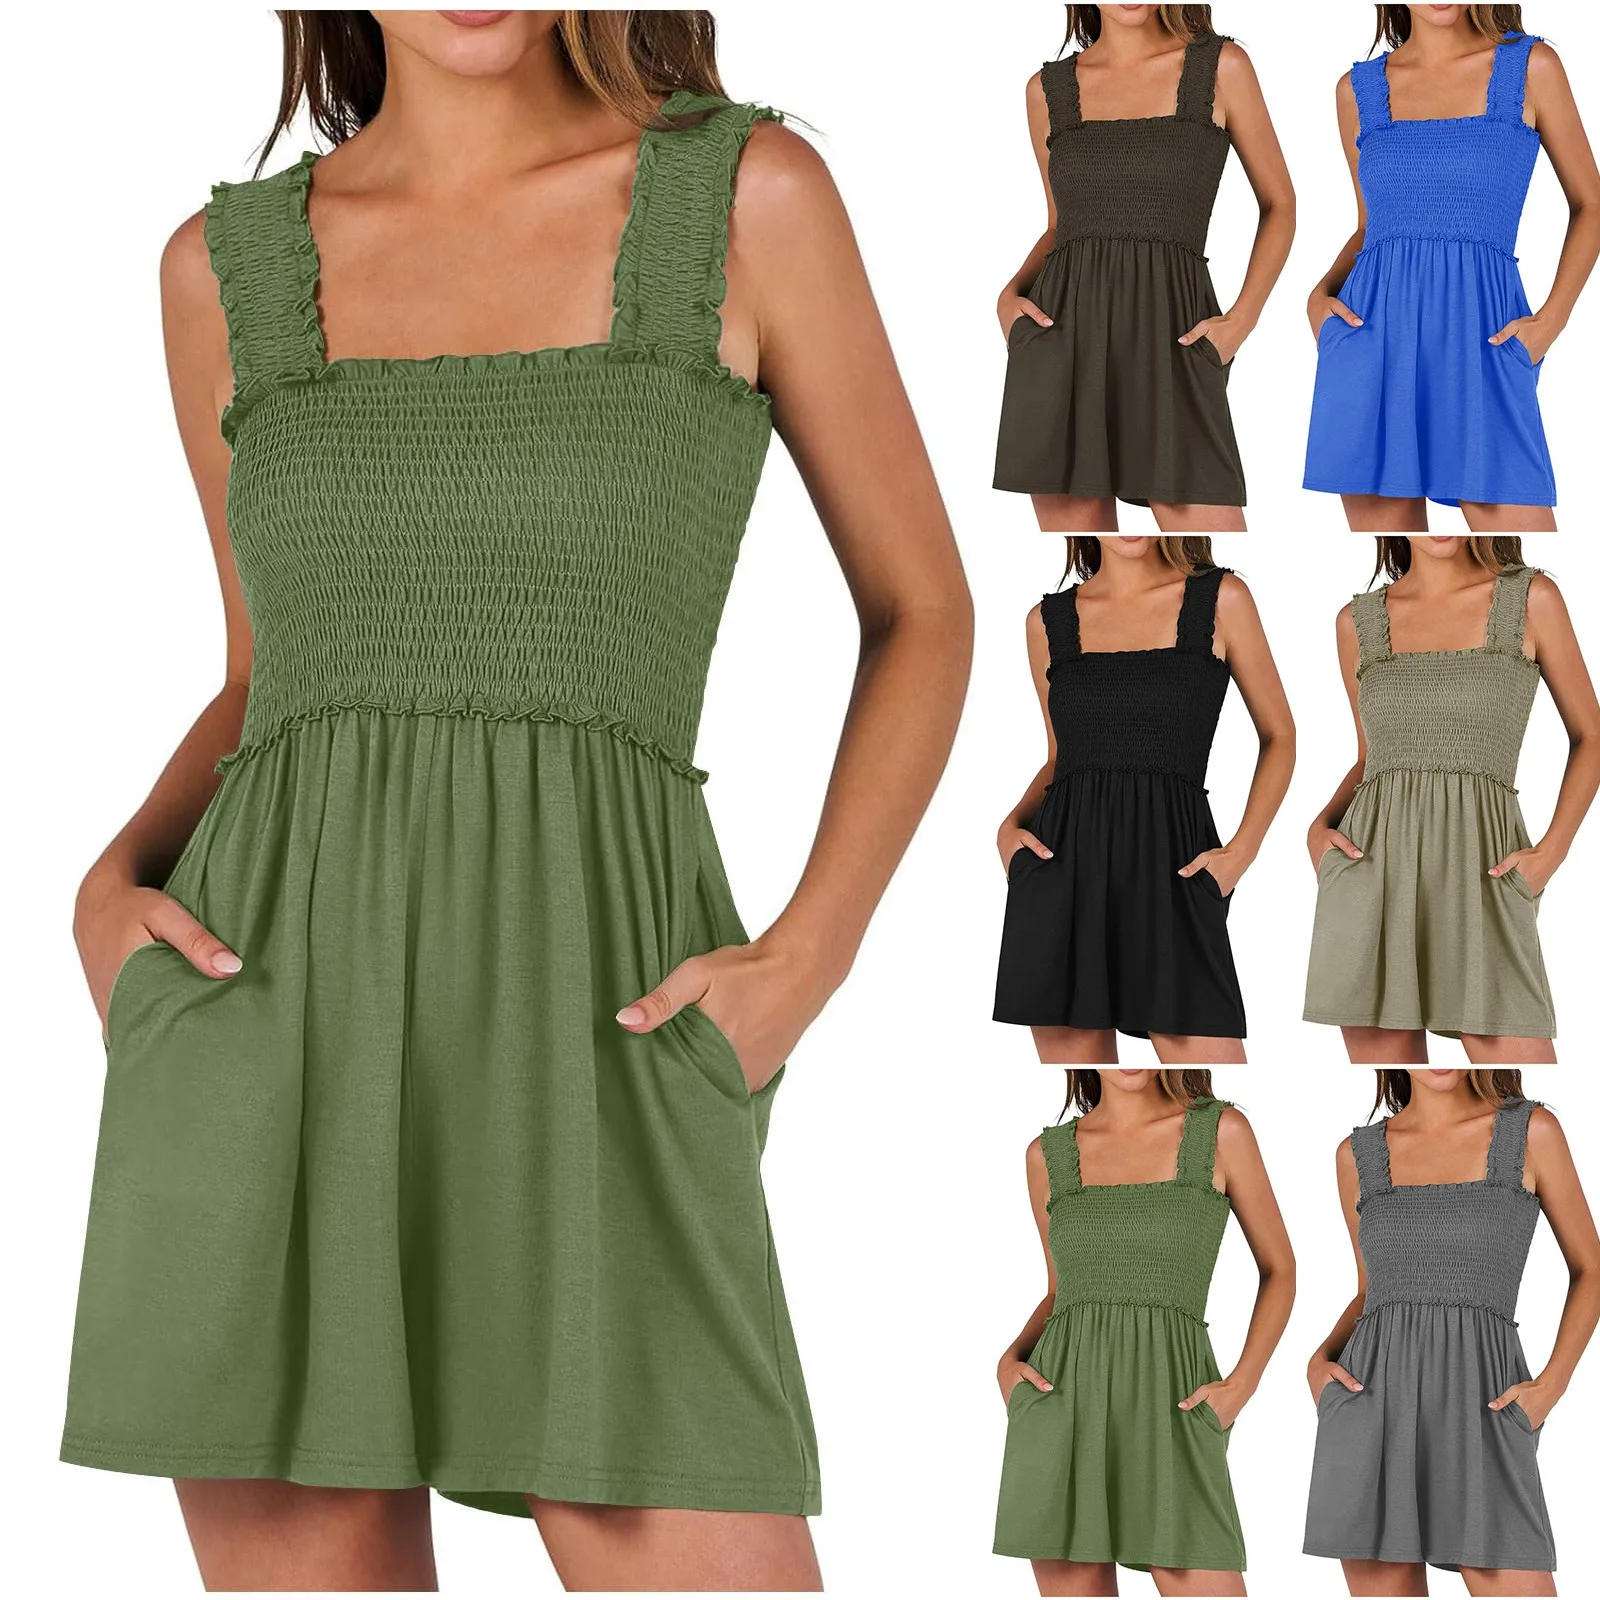 

Women's Summer Rompers Square Neck Sleeveless Smocked Dressy Casual Romper Dresses Beach Outfits With Pockets فساتين طويلة